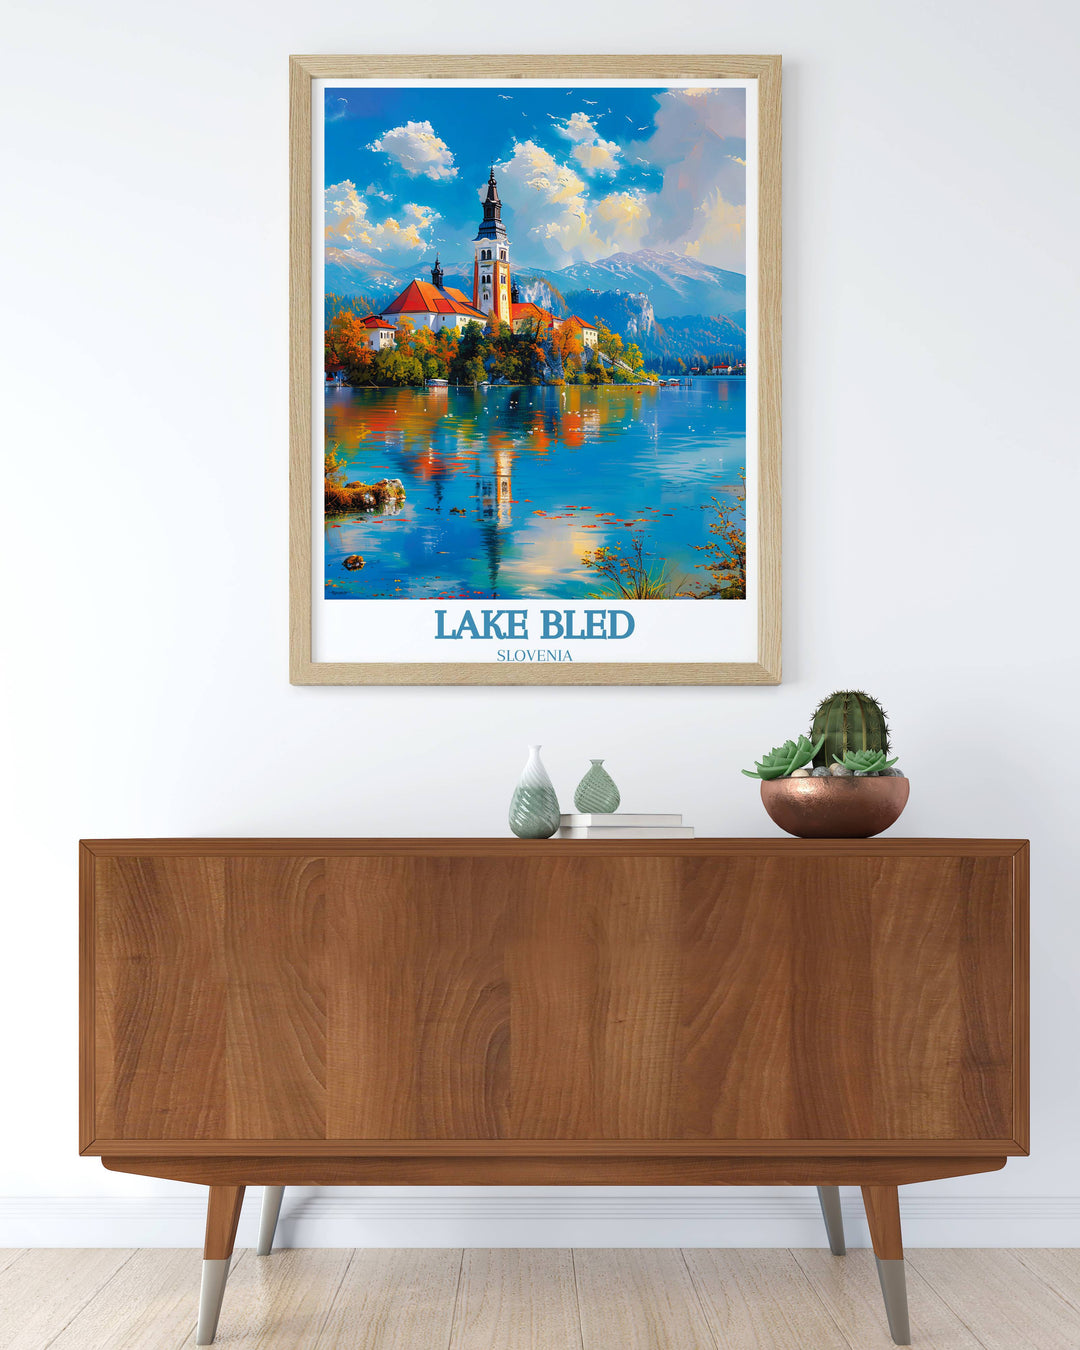 Artistic representation of Bled Castle and Lake Bled showcasing historical and natural beauty perfect for Slovenia Art Print collections